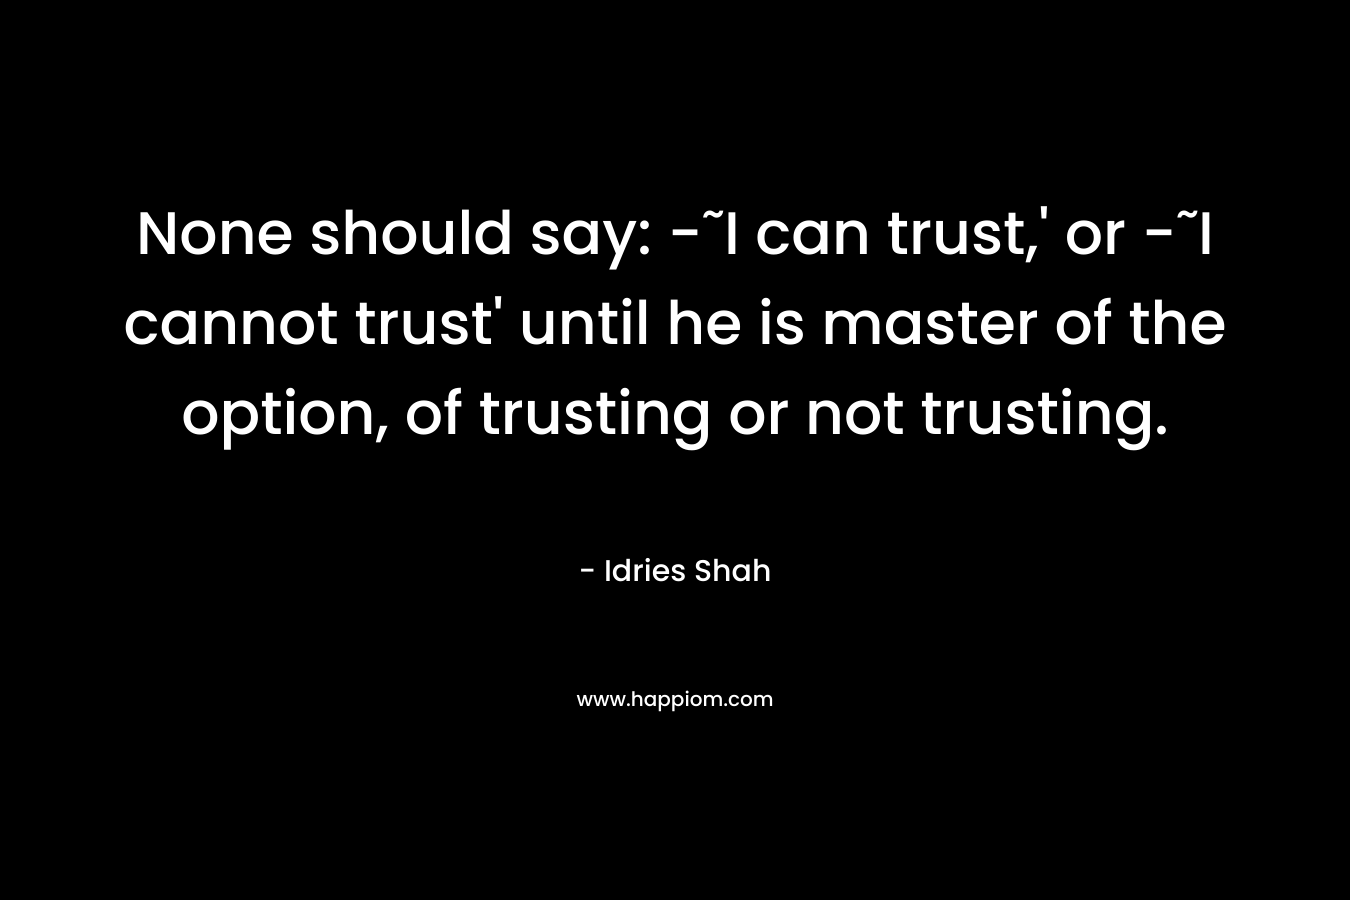 None should say: -˜I can trust,' or -˜I cannot trust' until he is master of the option, of trusting or not trusting.